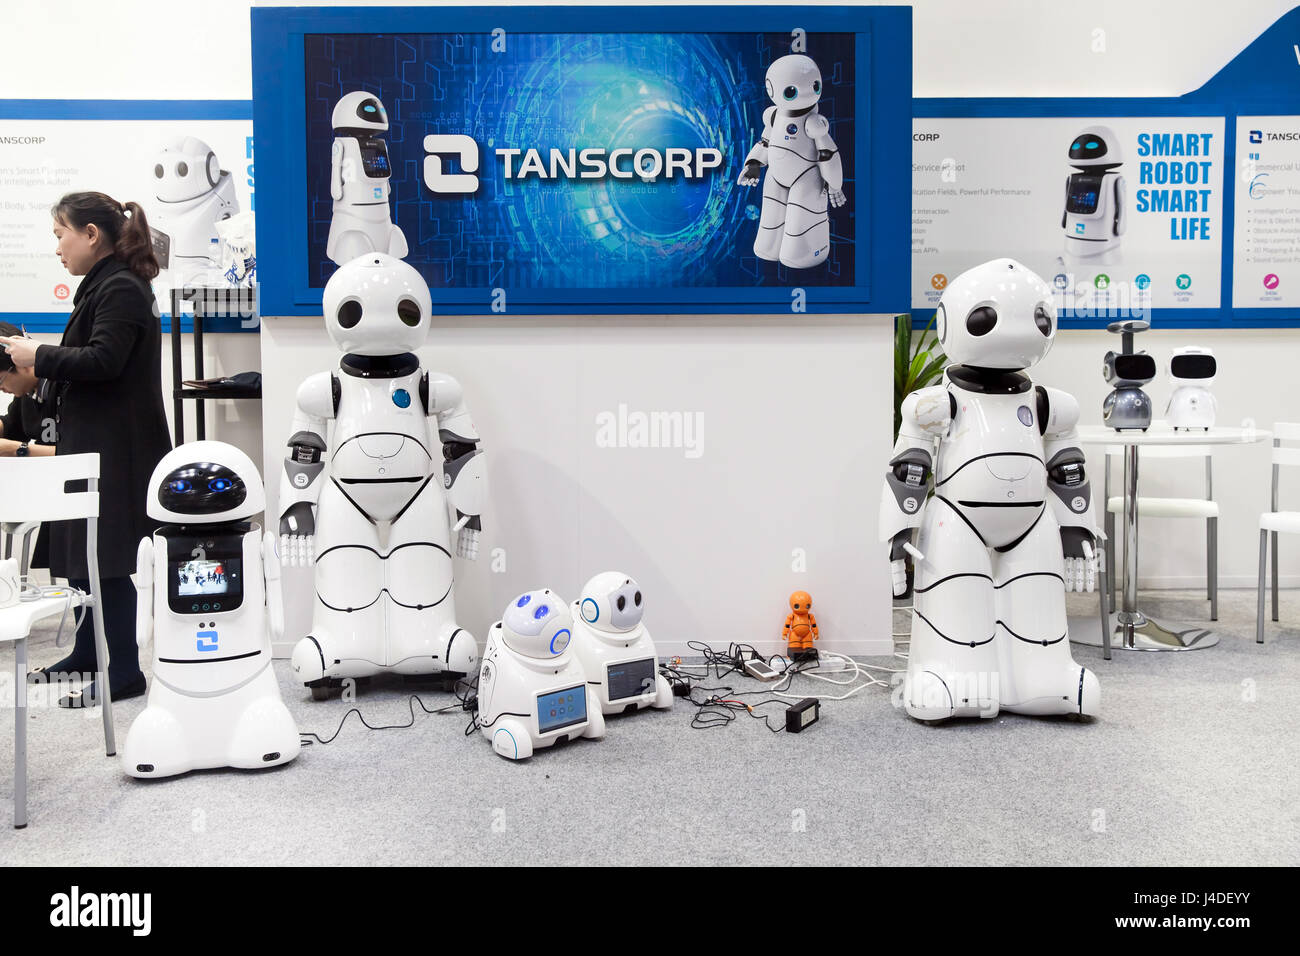 Smart robot UU dancing. Shenzhen Tanscorp technology company exhibition 2017 in Hannover Messe, Germany Stock Photo - Alamy